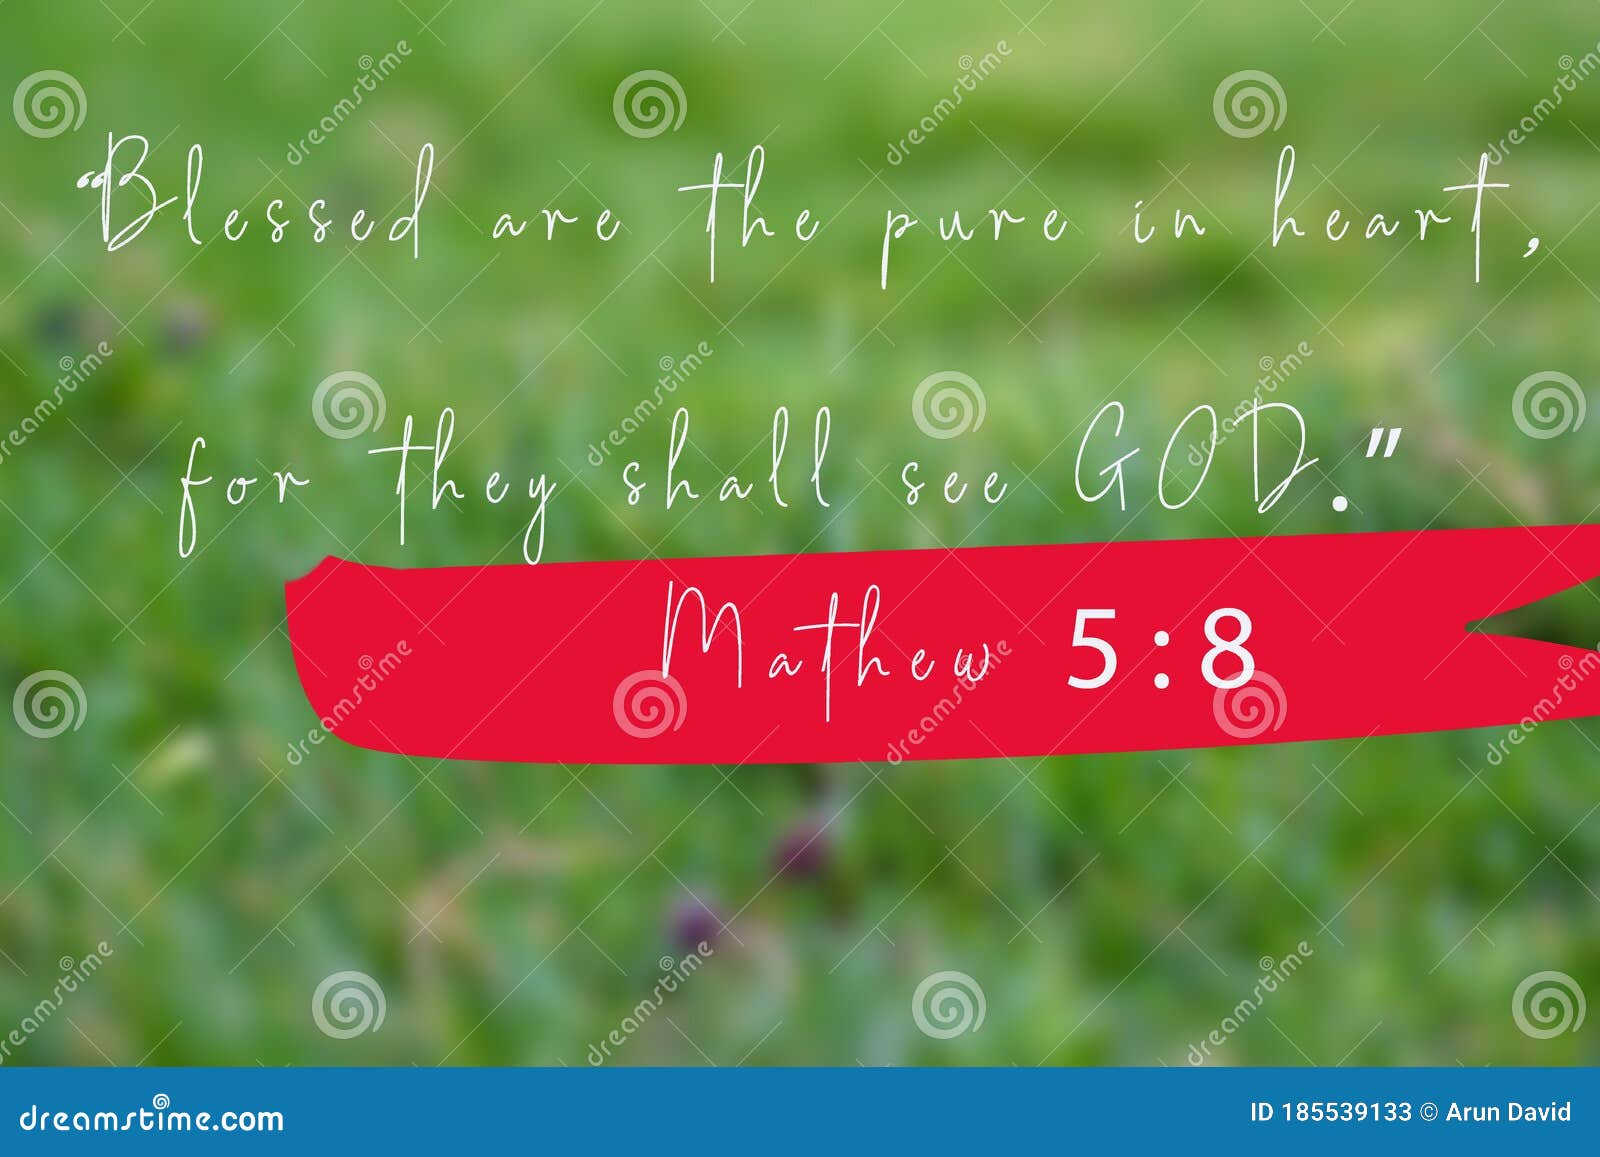 bibical words `blessed are the pure in heart for they shall see god  mathew 5:8